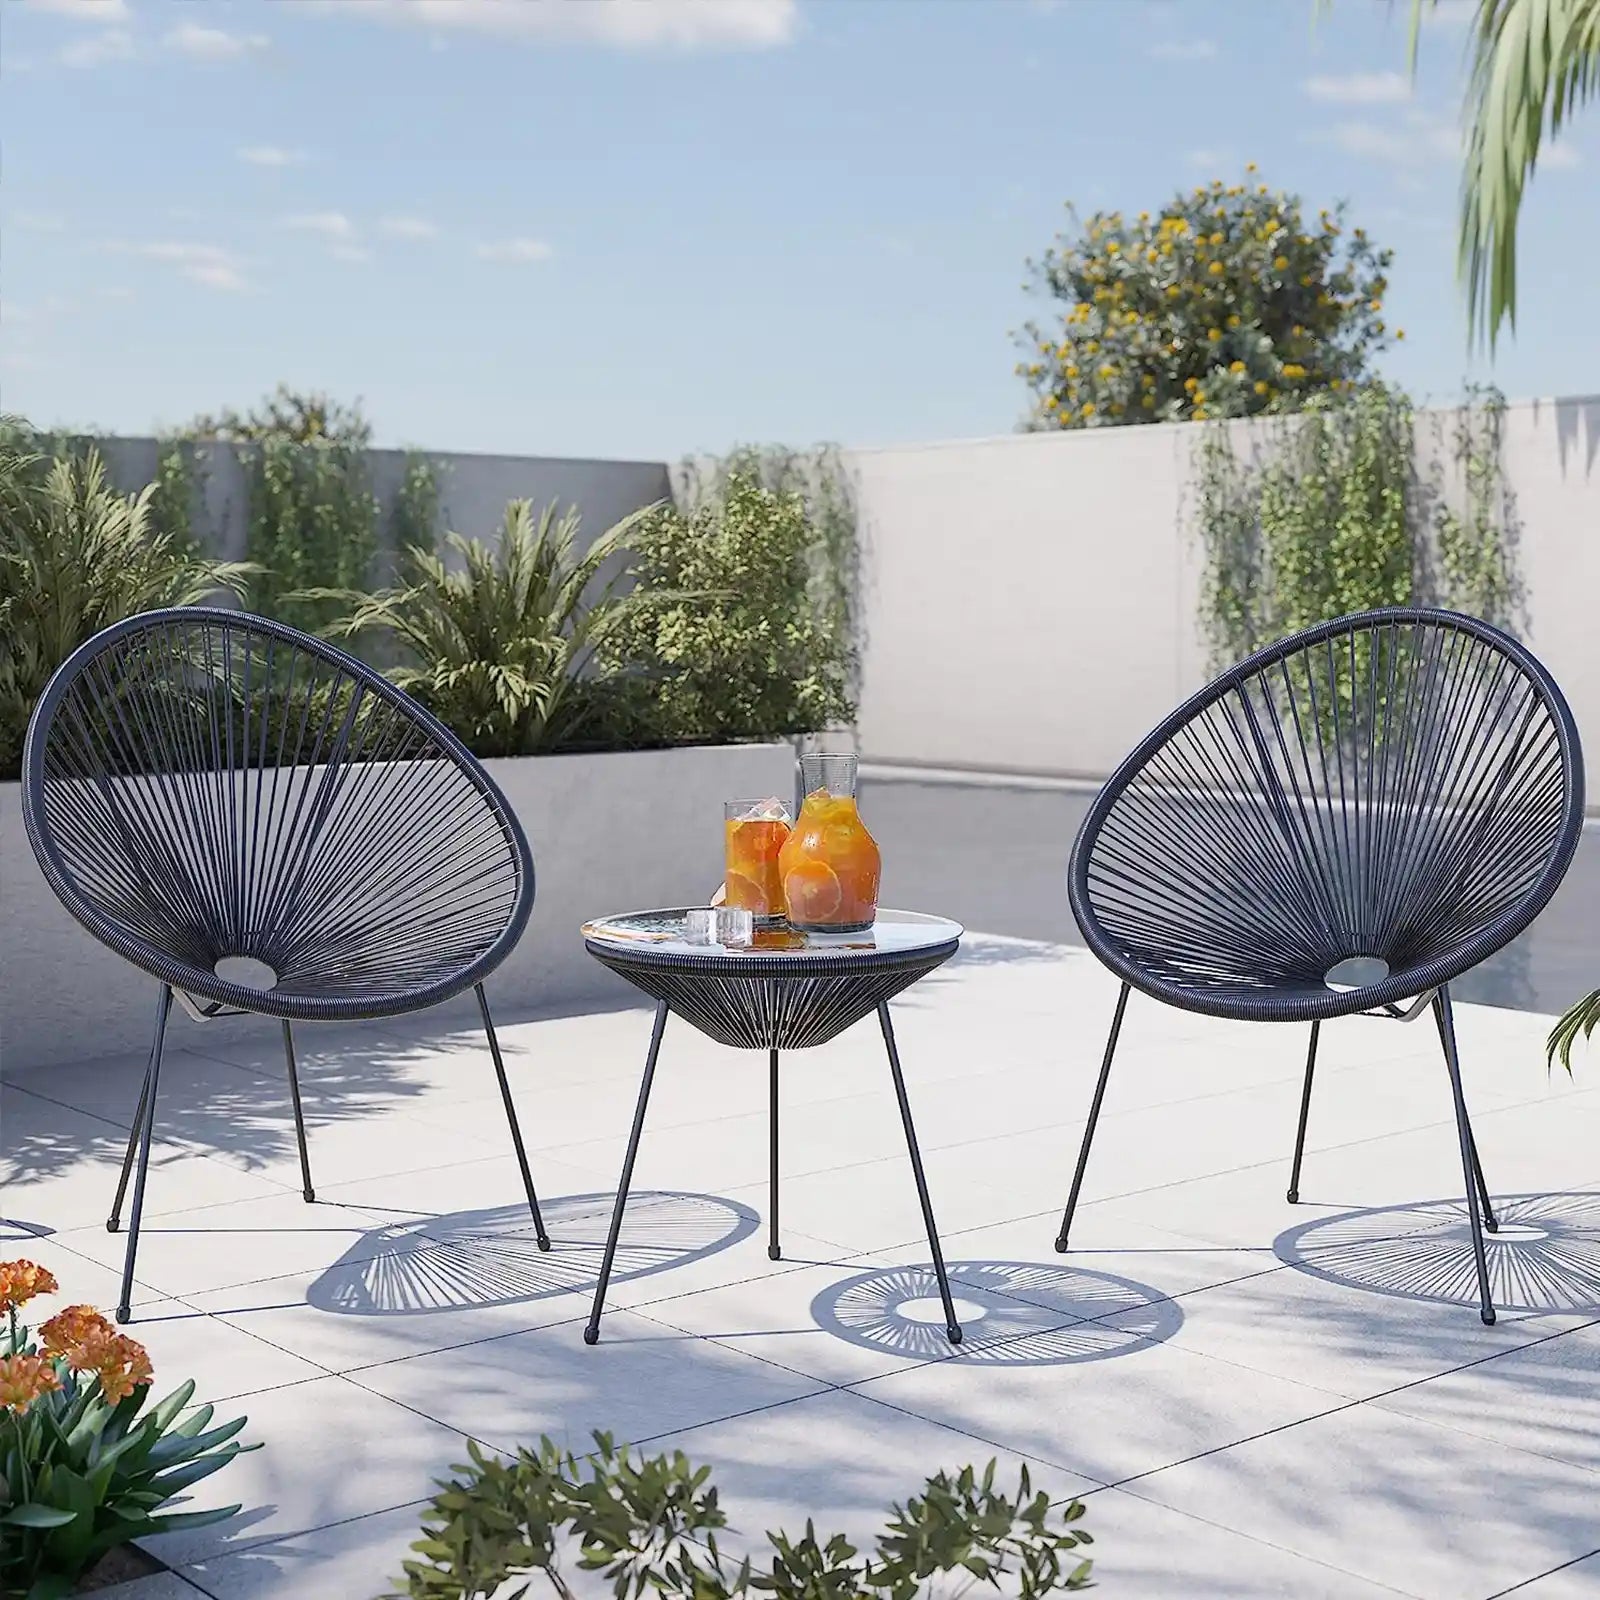 3 Piece Modern Rattan Patio Bistro Set with Round Chairs and Glass Top Accent Table, Wicker Outdoor Furniture for Backyard or Porch